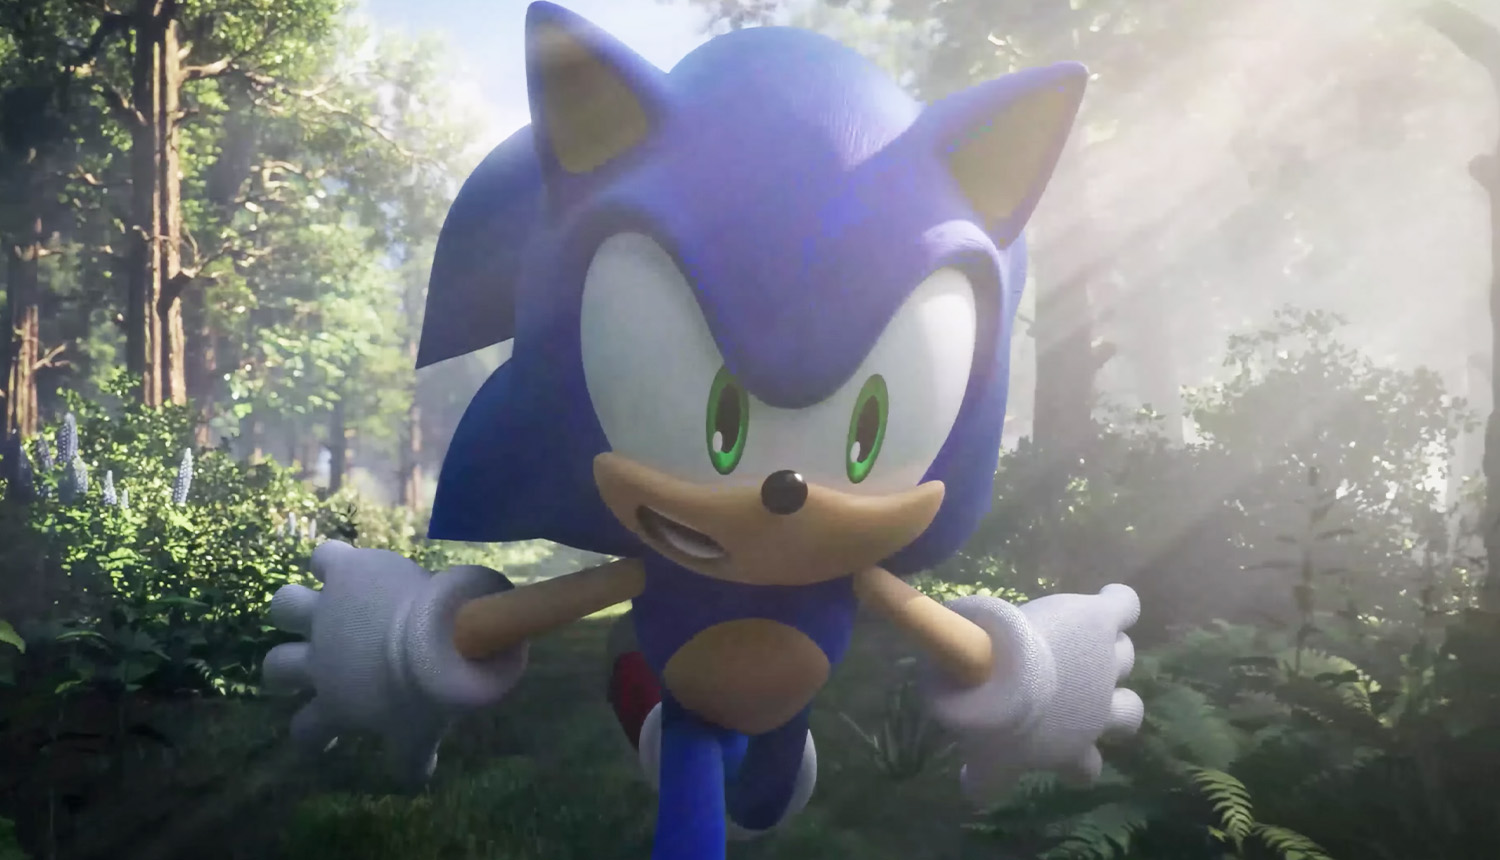 Sonic Frontiers Nintendo Switch and Sonic The Hedgehog 2 Movie